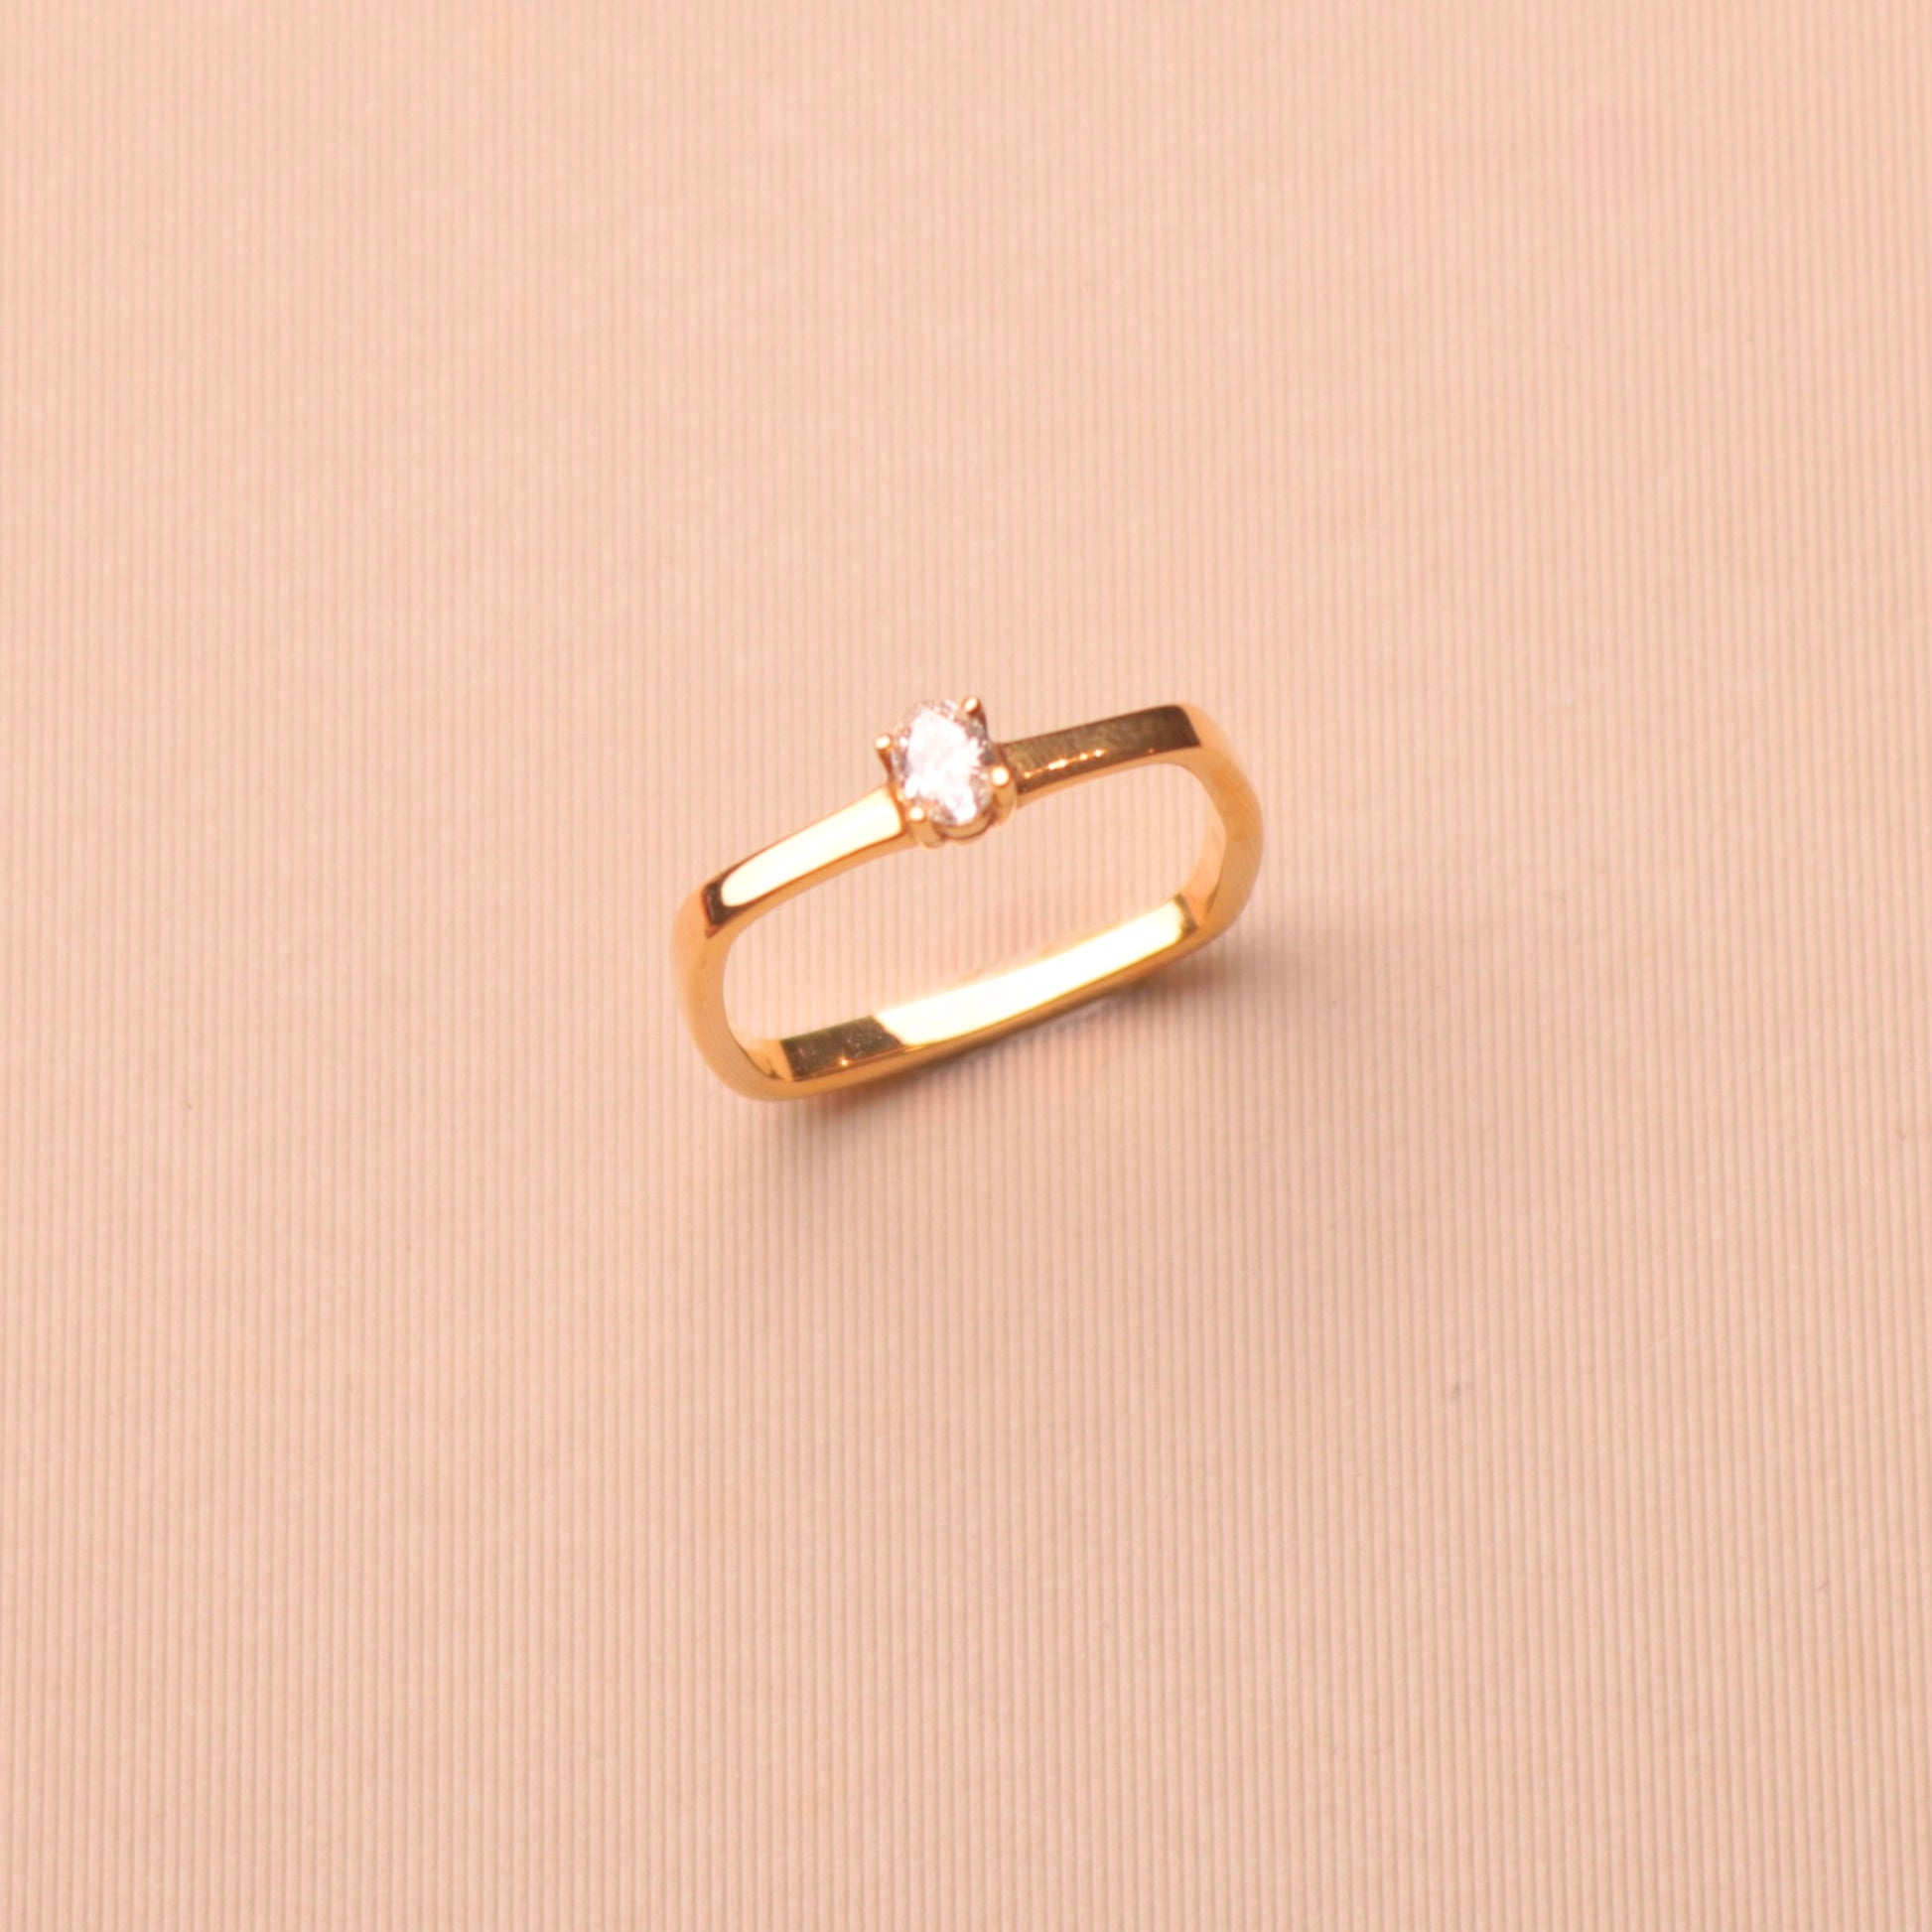 minimalistic square ring is a stunning and sophisticated piece of jewelry that features a beautiful oval-cut diamond as its centerpiece.